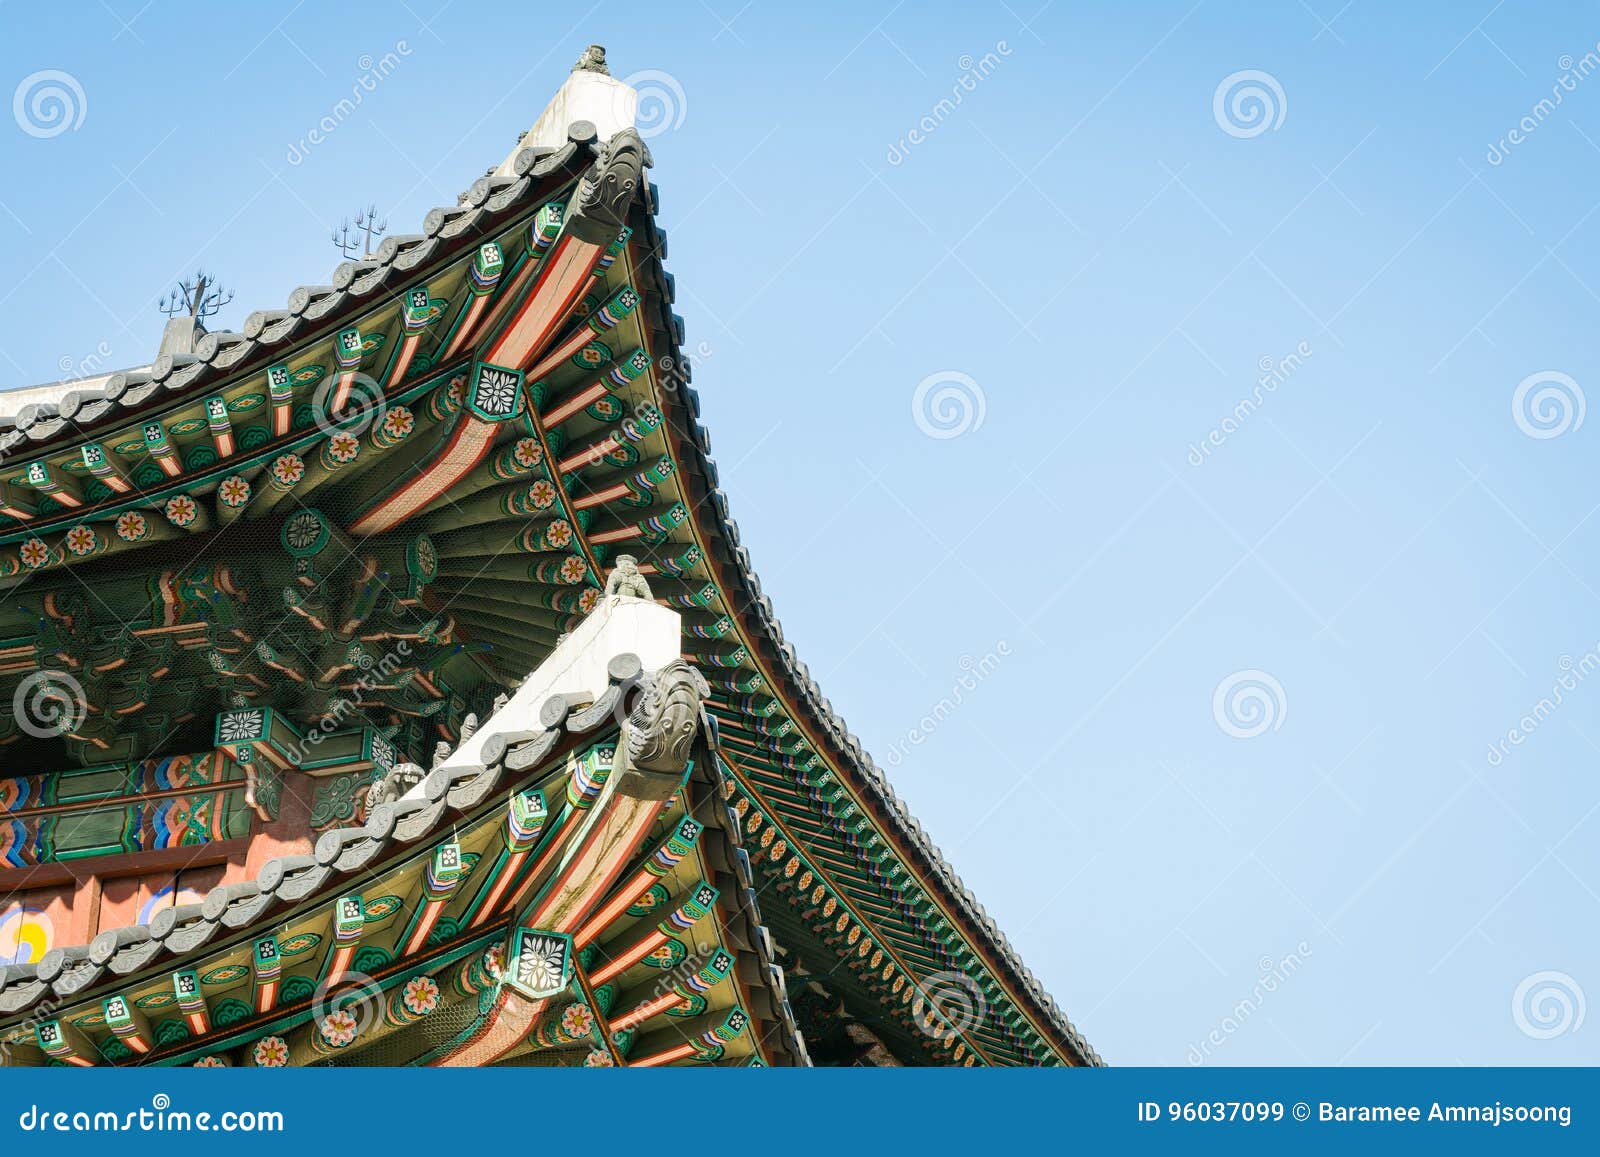 Traditional Korean Decor Of Village House, Seoul, South Korea. Stock Photo,  Picture and Royalty Free Image. Image 178858371.